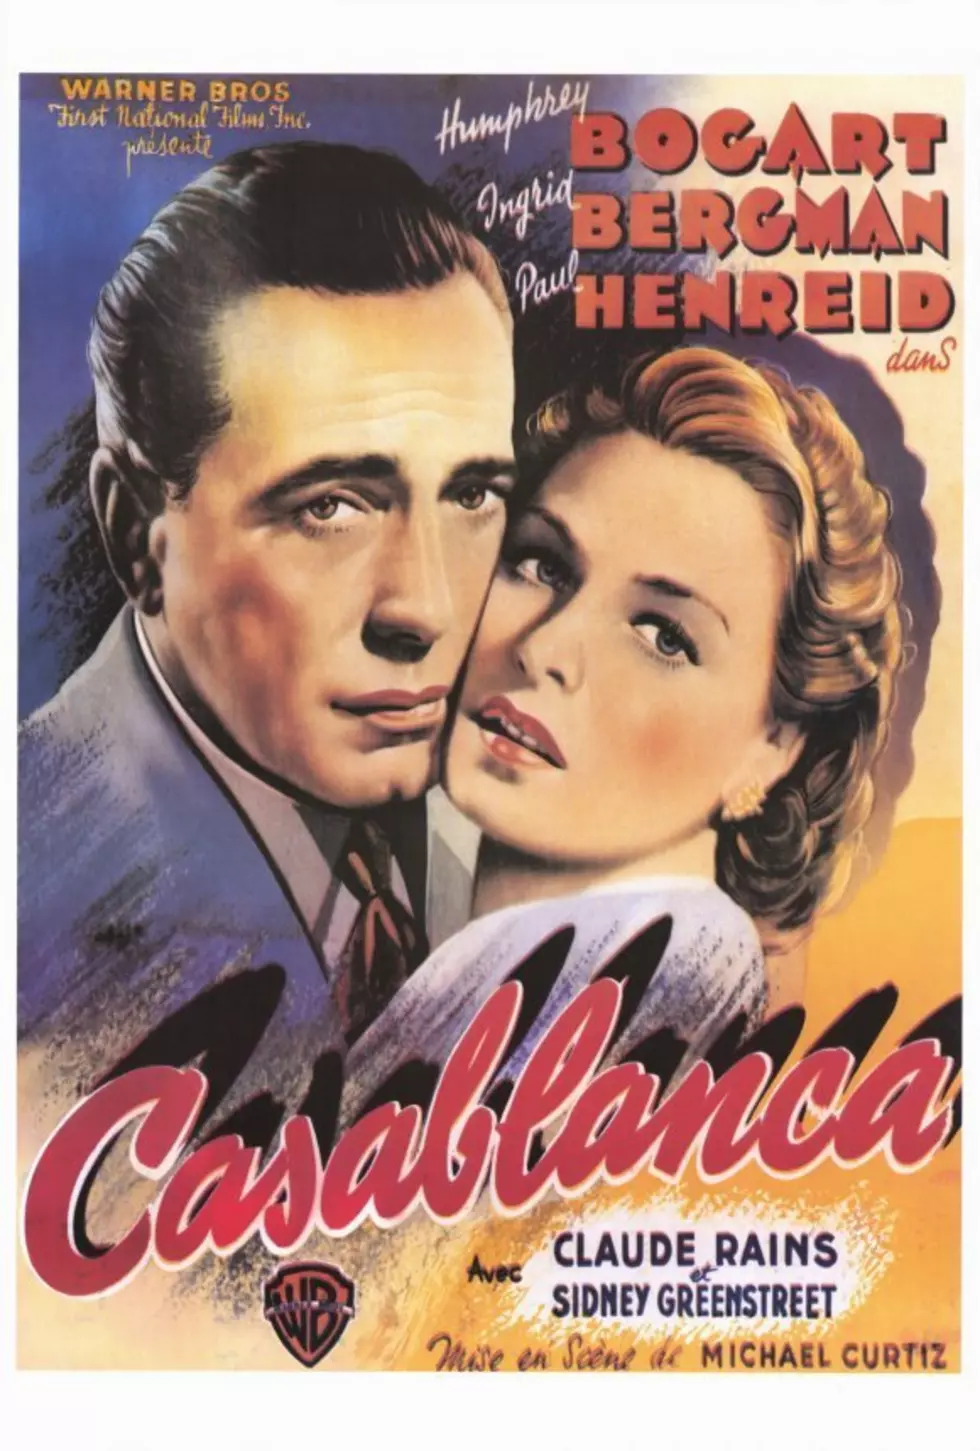 &#8220;Casablanca&#8221; To Be Seen In An Oneonta Theatre First Time In 70 Years!